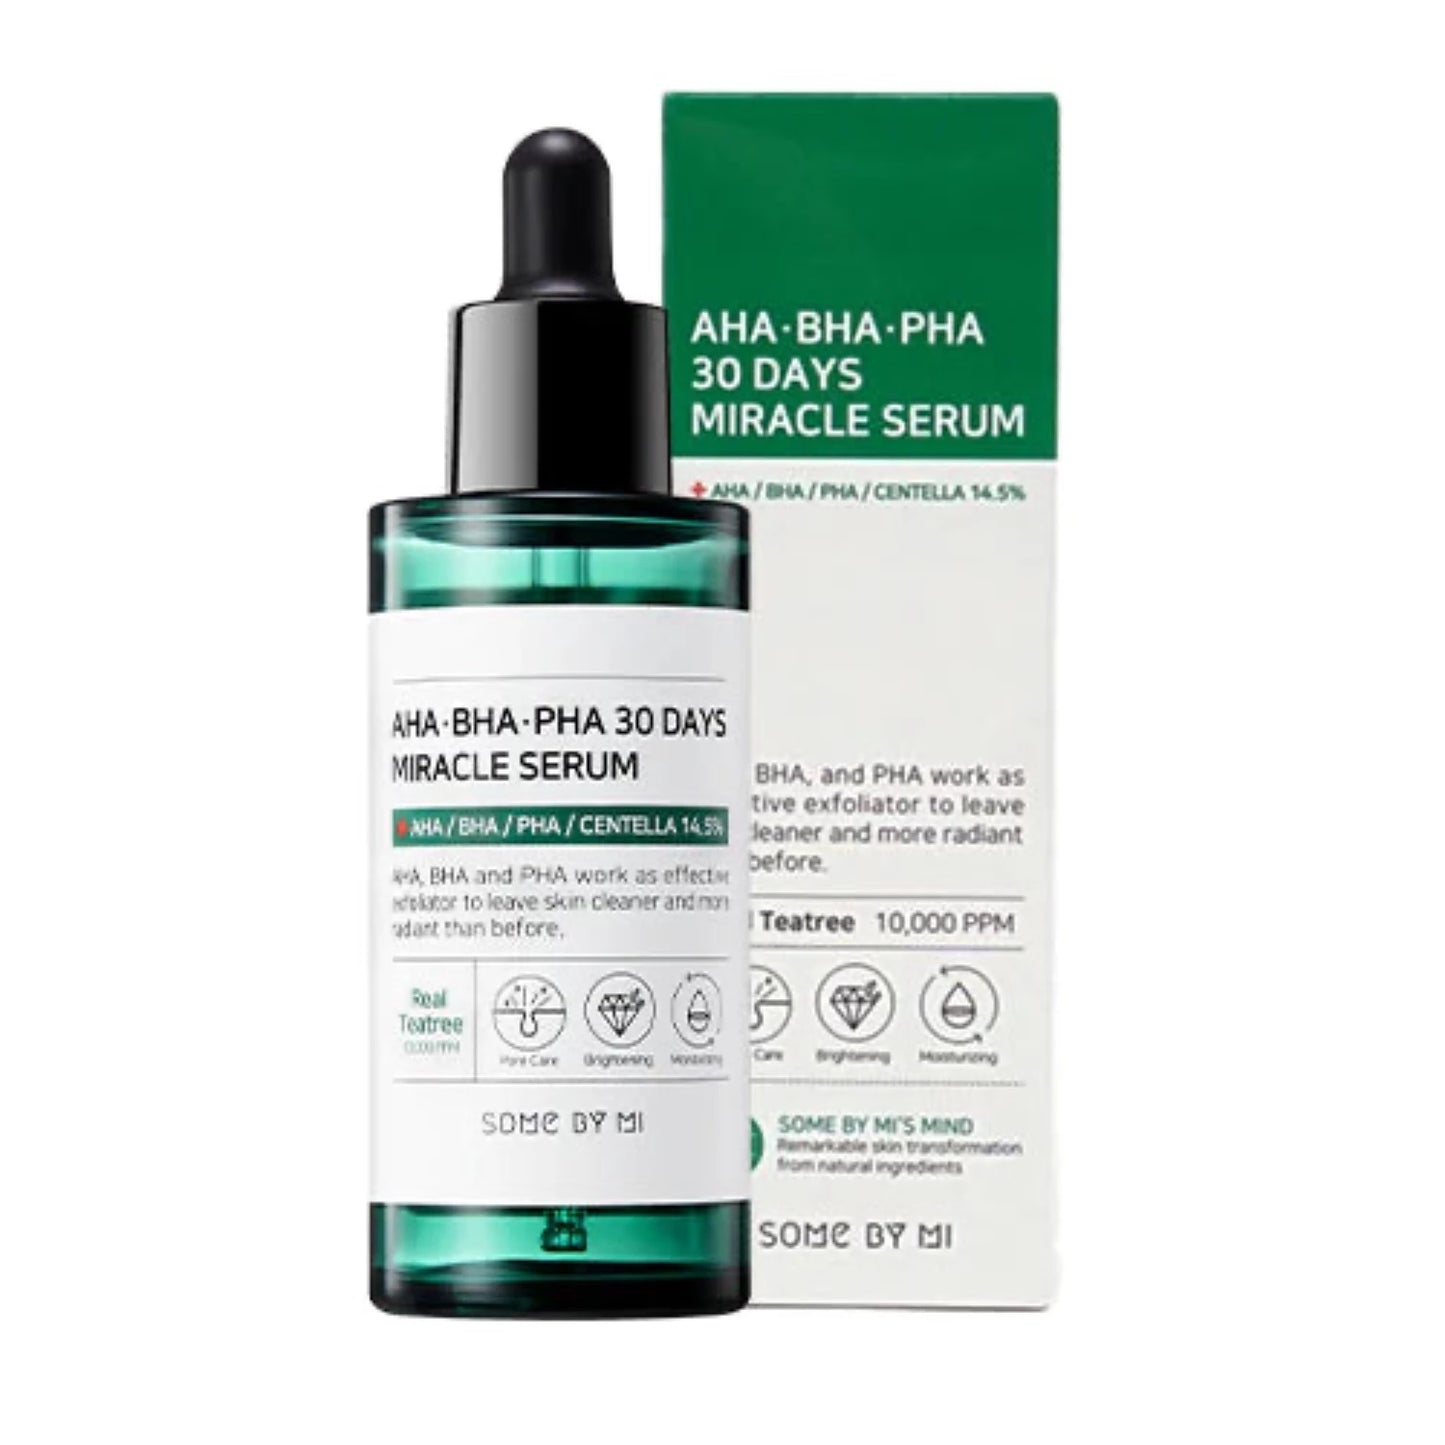 SOME BY MI AHA/BHA/PHA 30 Days Miracle Serum helps to diminish inflammation while promoting collagen production and skin cell renewal. Additionally, it assists in gently exfoliating, removing dead skin cells and other impurities.